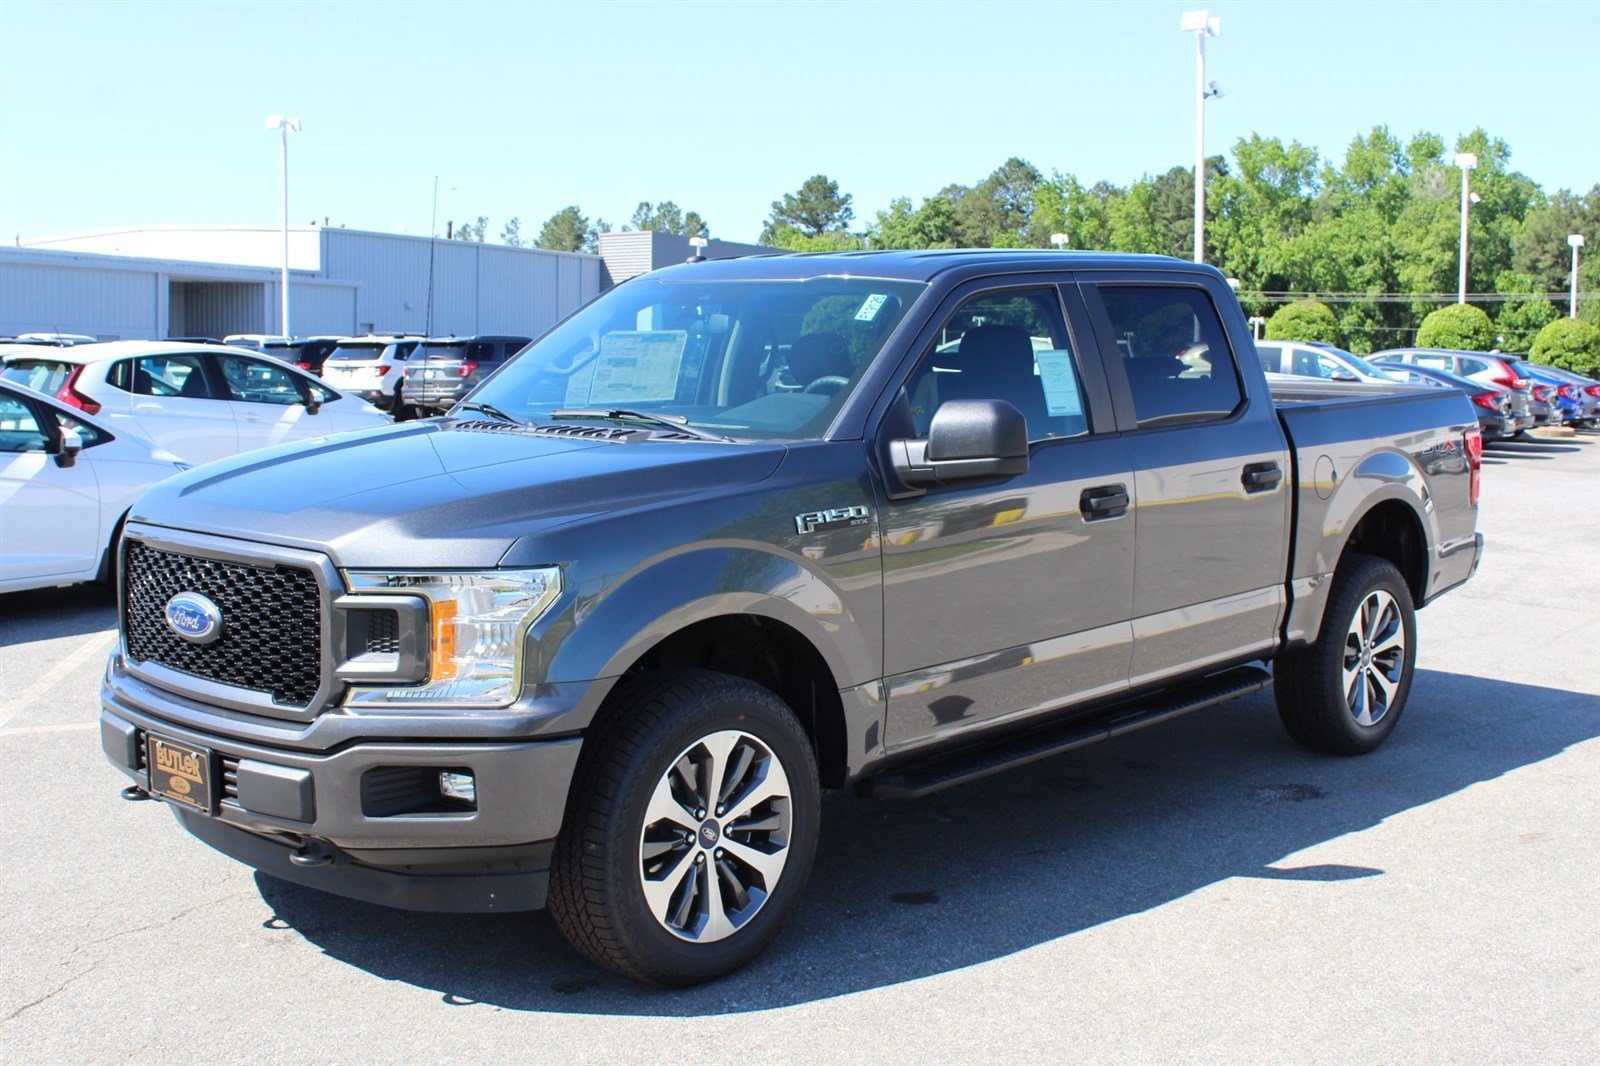 New 2019 Ford F-150 XL Crew Cab Pickup in Milledgeville #F19126